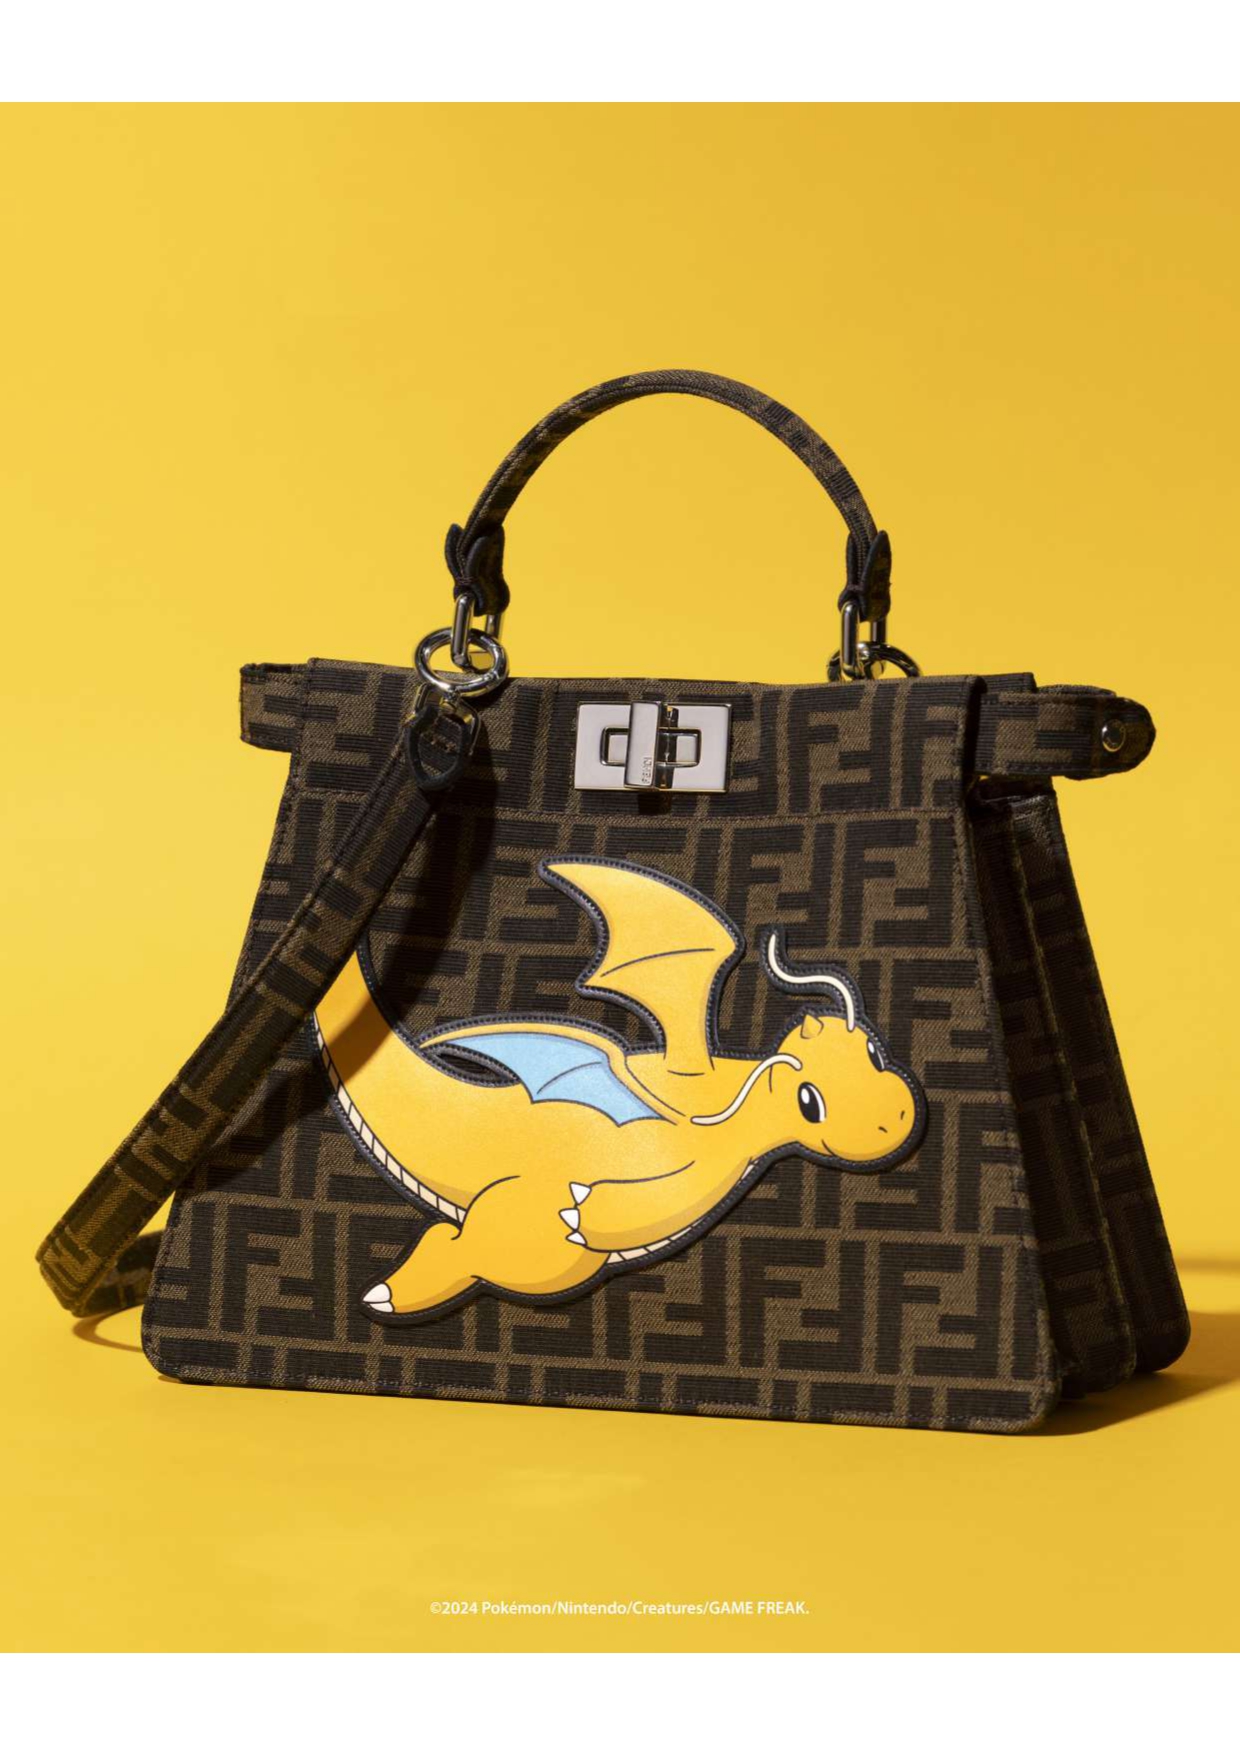 Fendi Unleashes the Year of the Dragon with a Playful Twist: The Fendi x Fragment x Pokémon Collection